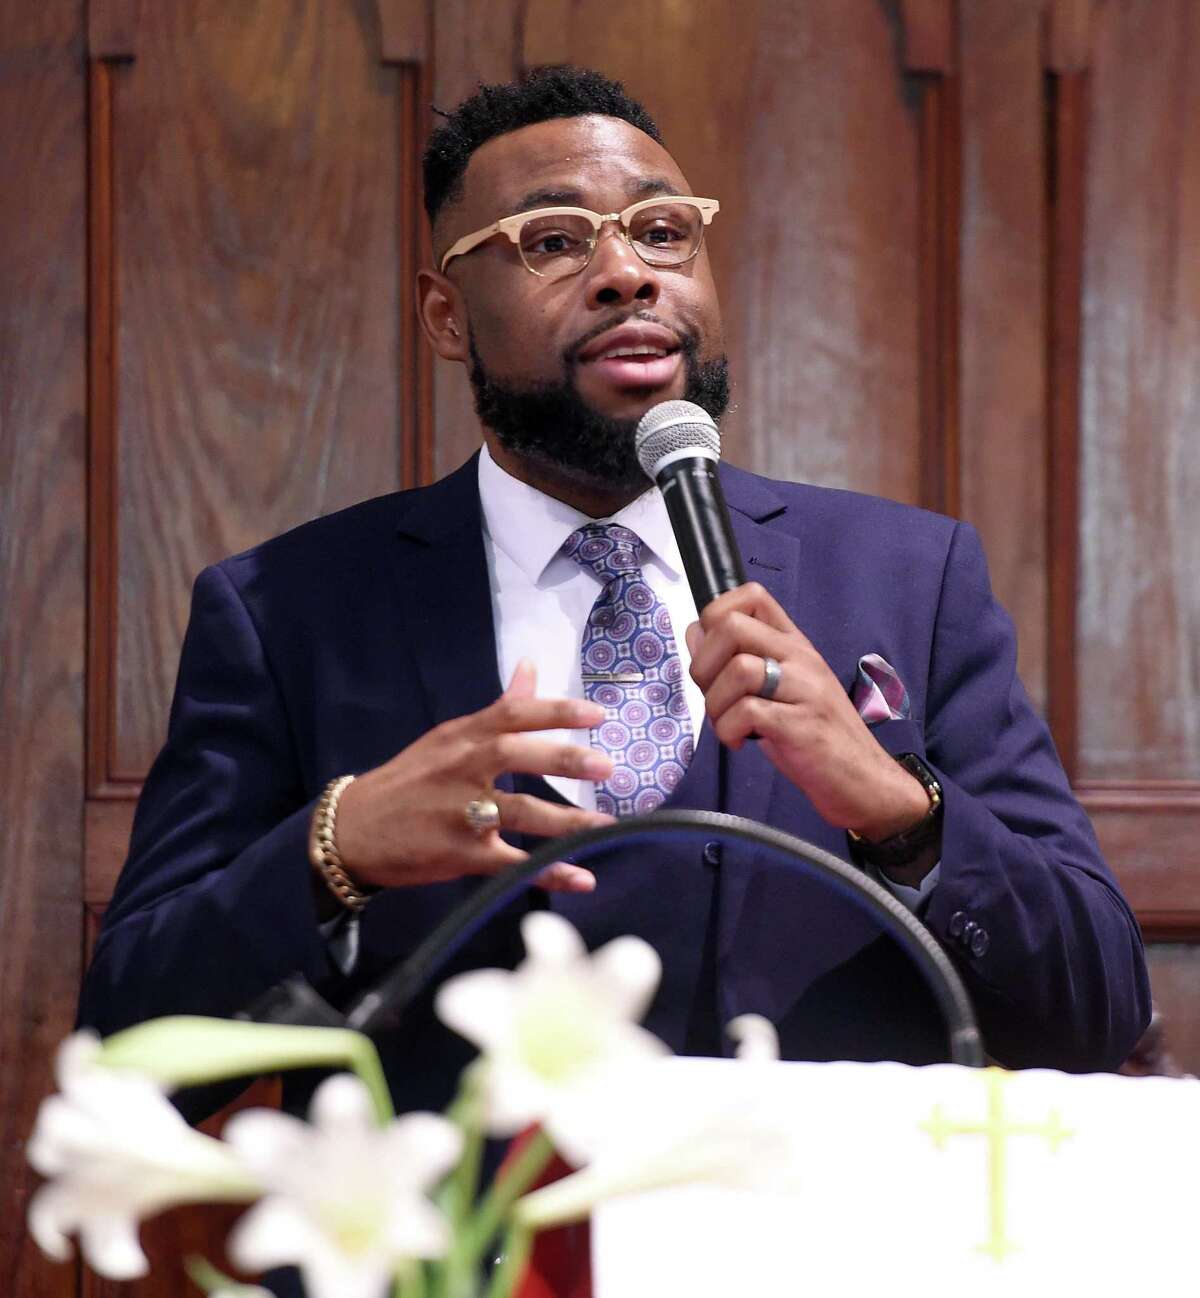 Rev. Kelcy G. L. Steele leads the Hope for Healing Community Prayer Service at Varick Memorial AME Zion Church in New Haven on April 28, 2019.